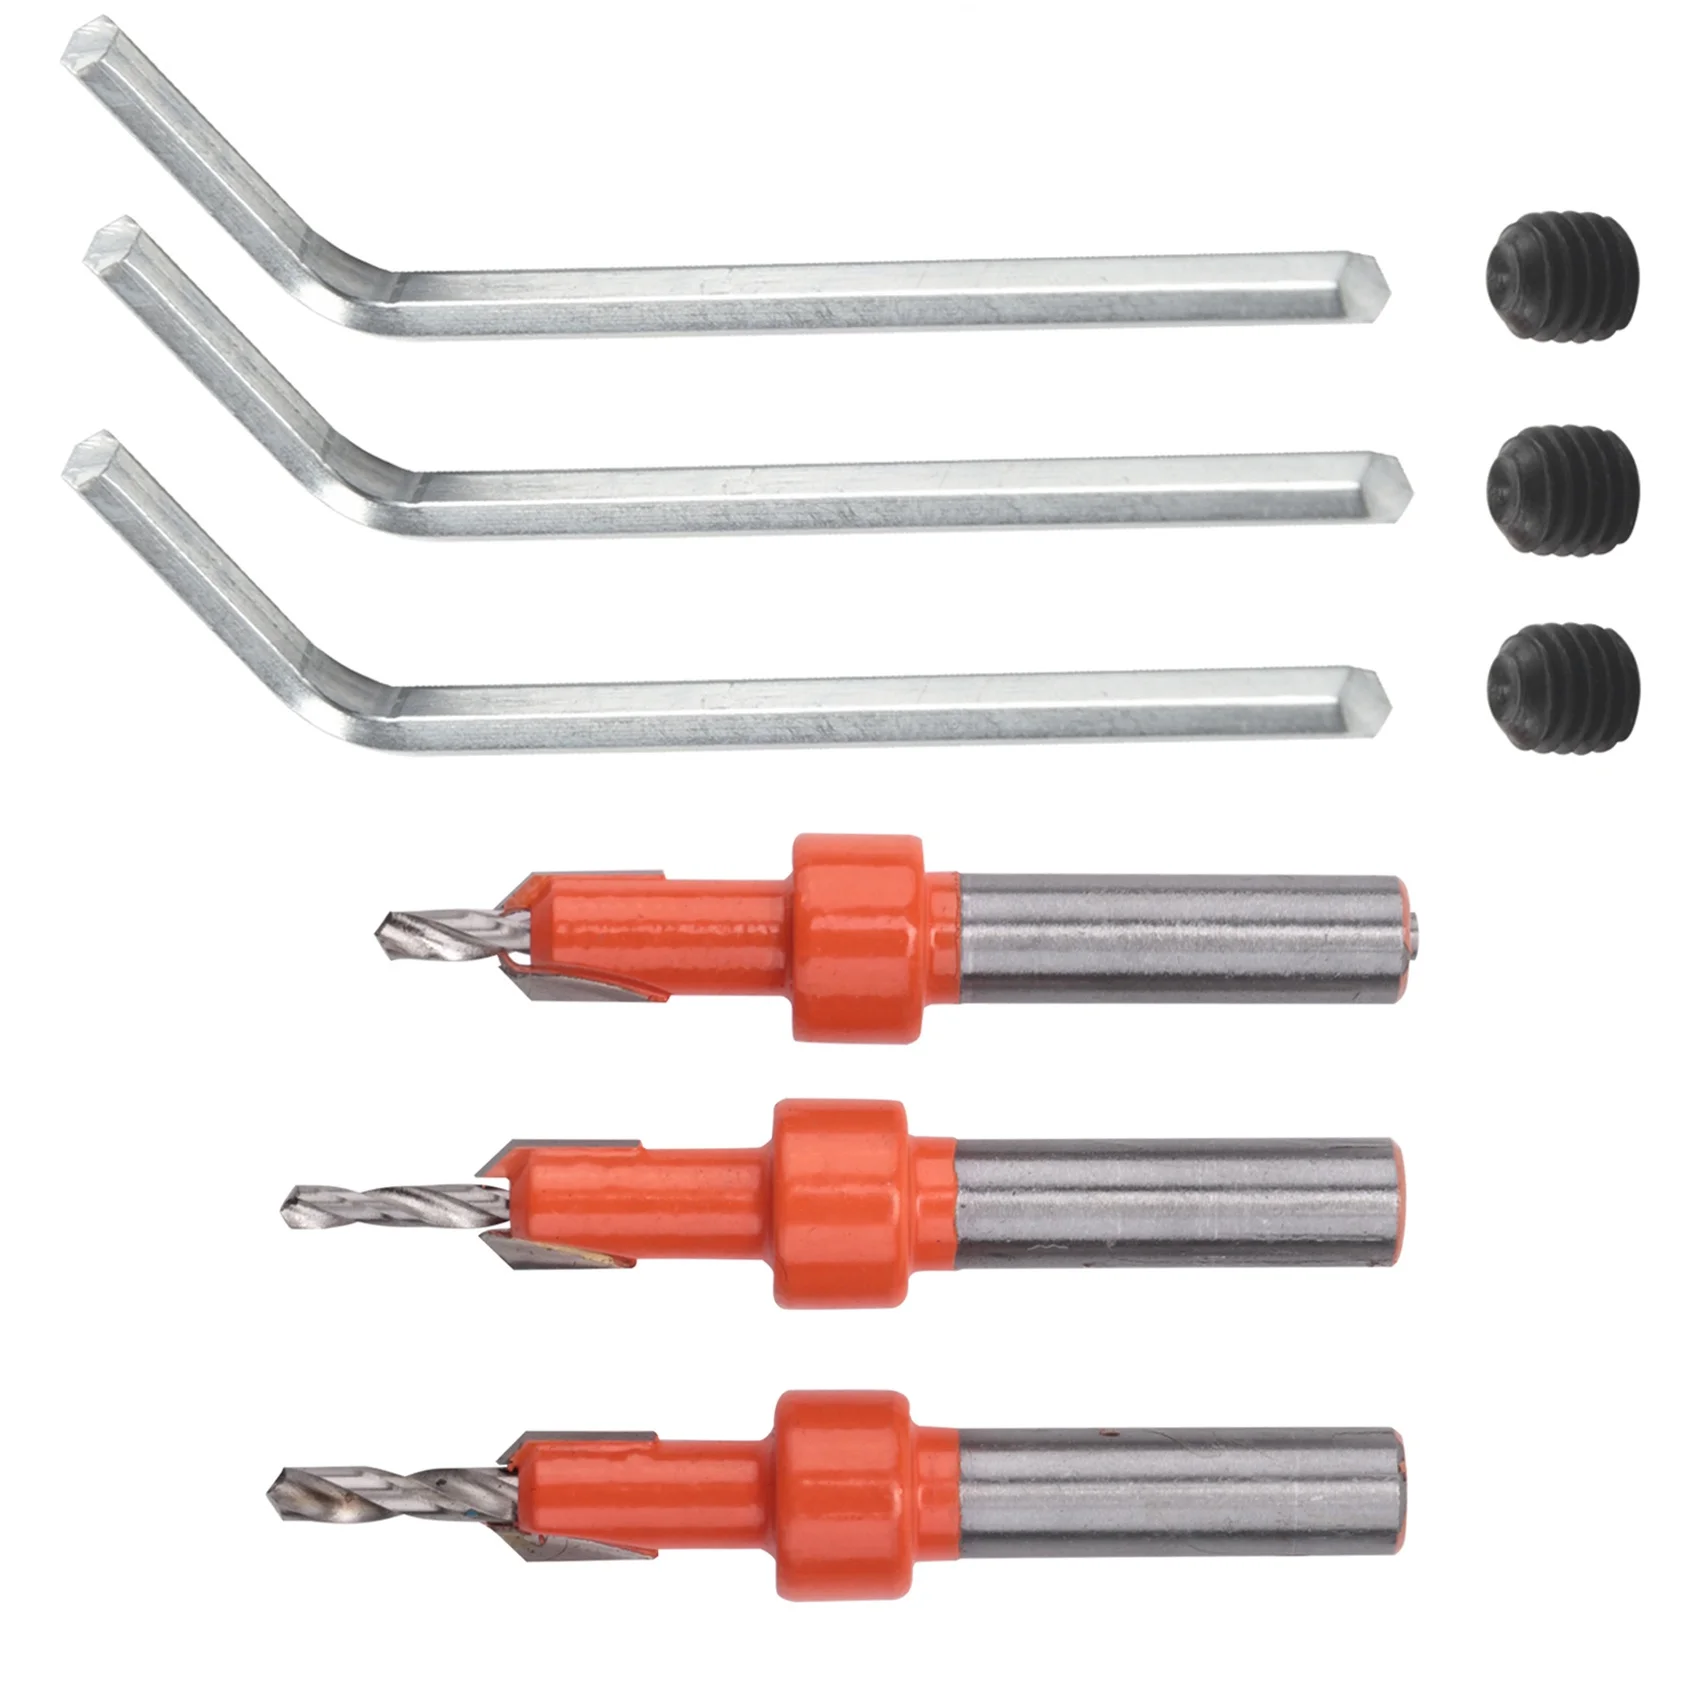 

3 Pcs Countersink Drill Bit Set Wood Hole Drill Bit Timber Wood Working Drill Bits with Hex Key for Wood Screw Cutter